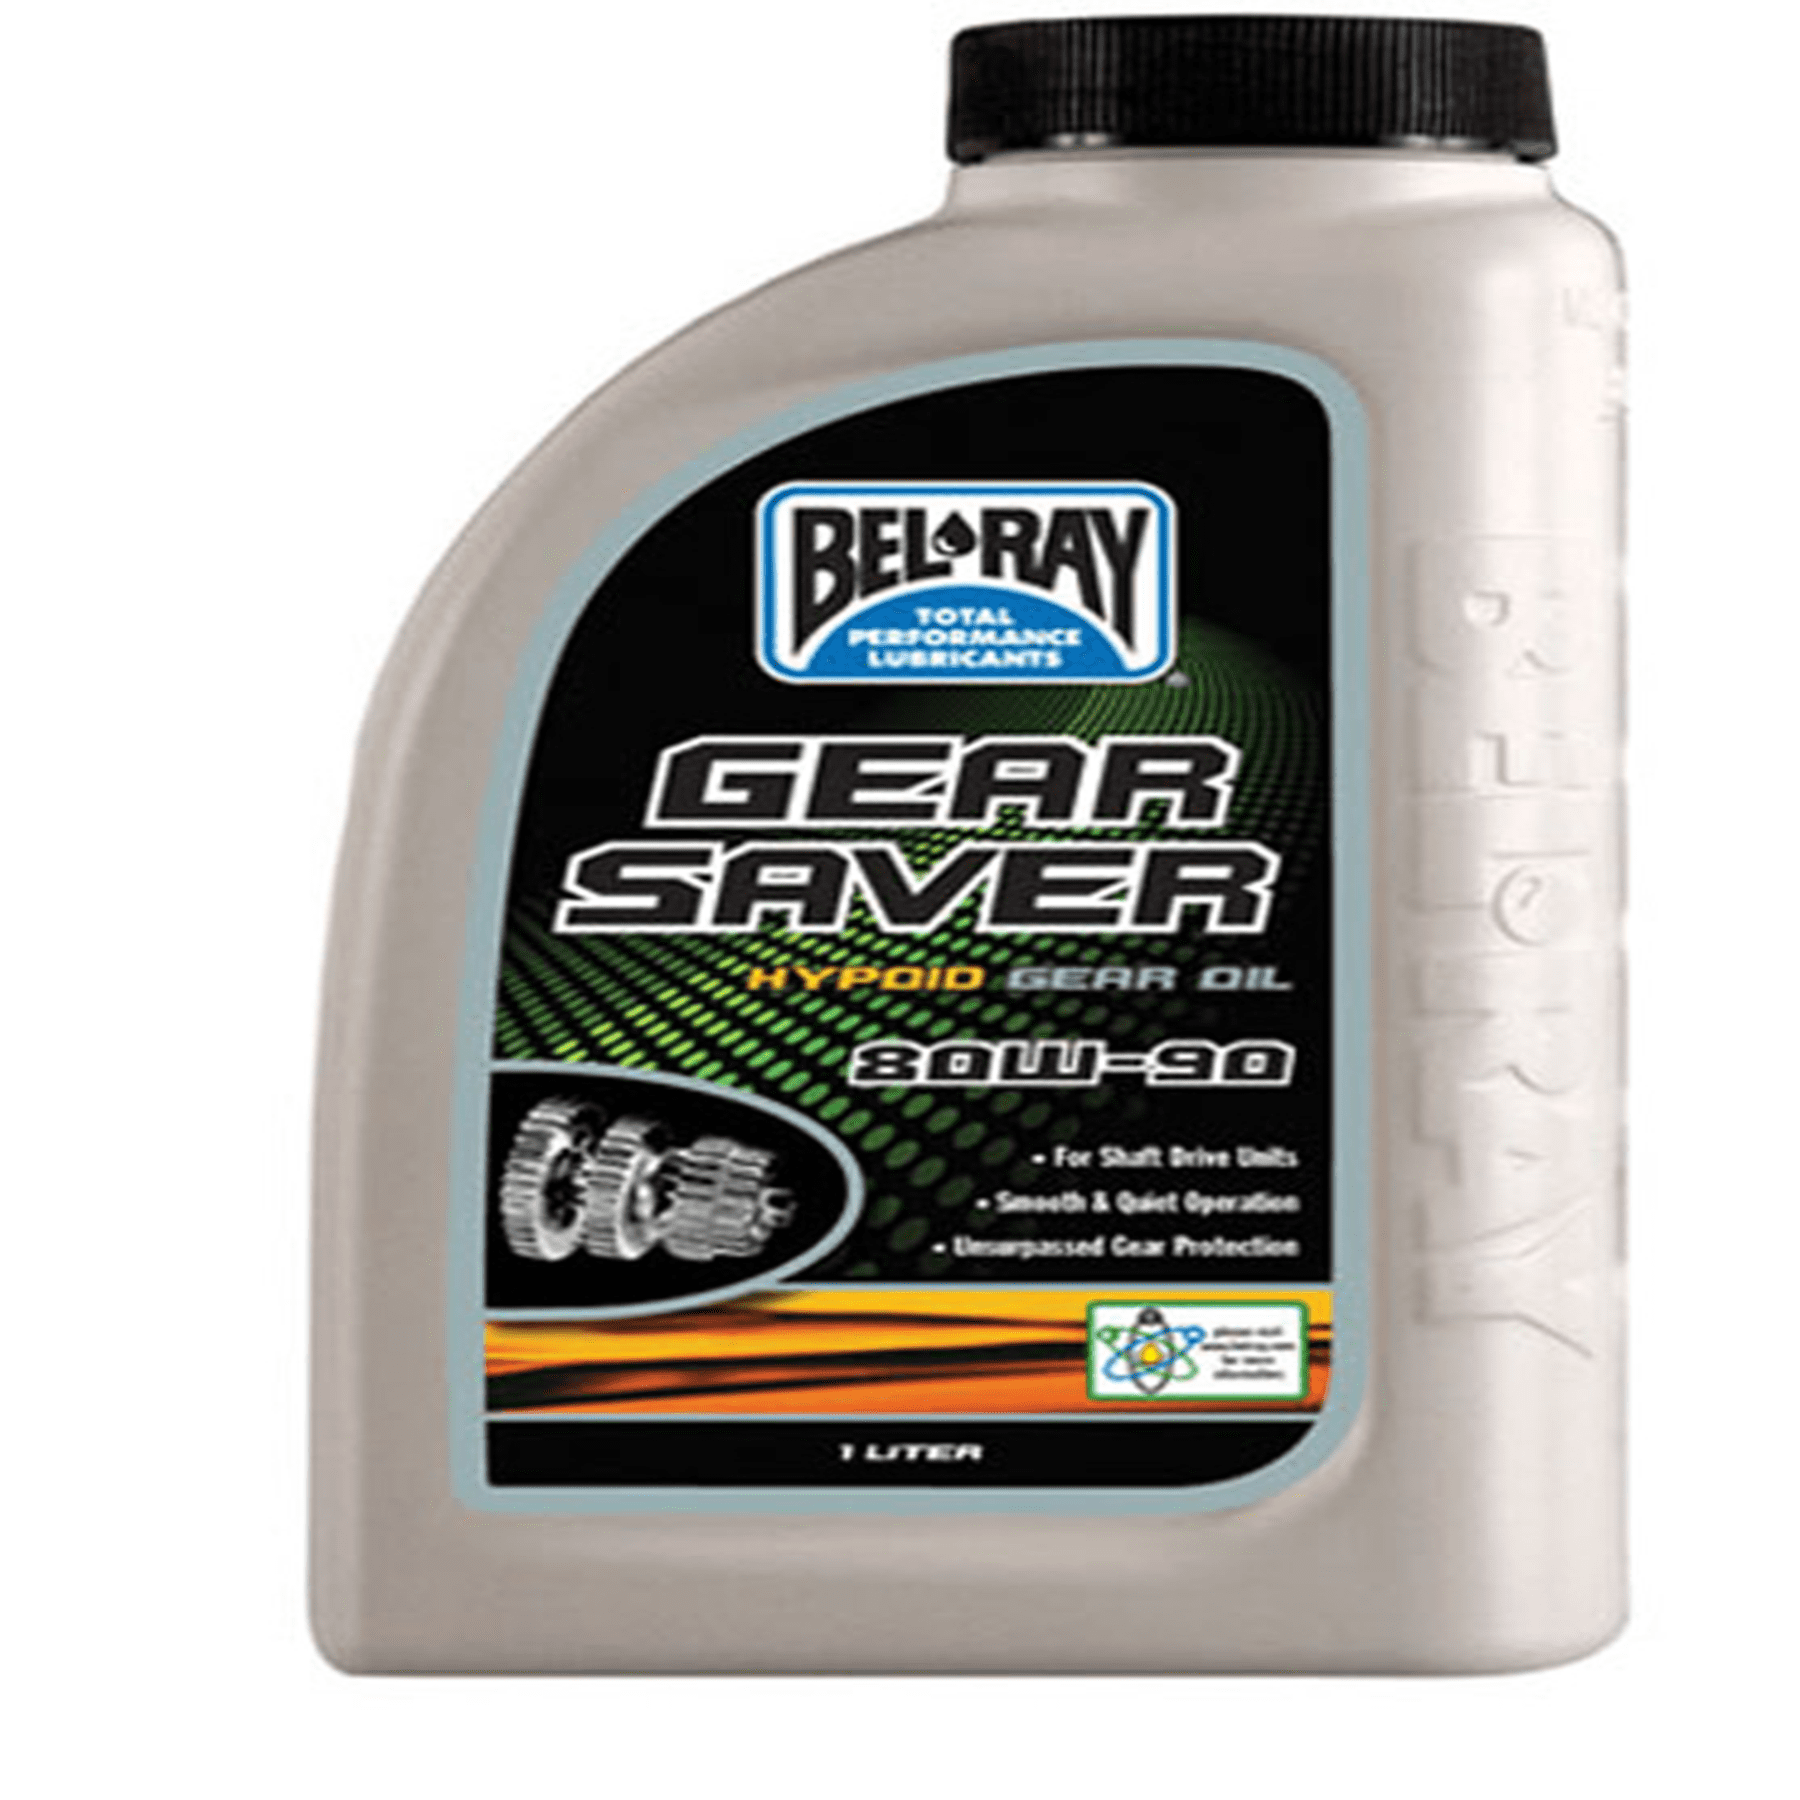 BEL-RAY GEAR SAVER HYPOID GEAR OIL 80W-90 (1L) - Walmart.com - Walmart.com How To Get Gear Oil Out Of Clothes